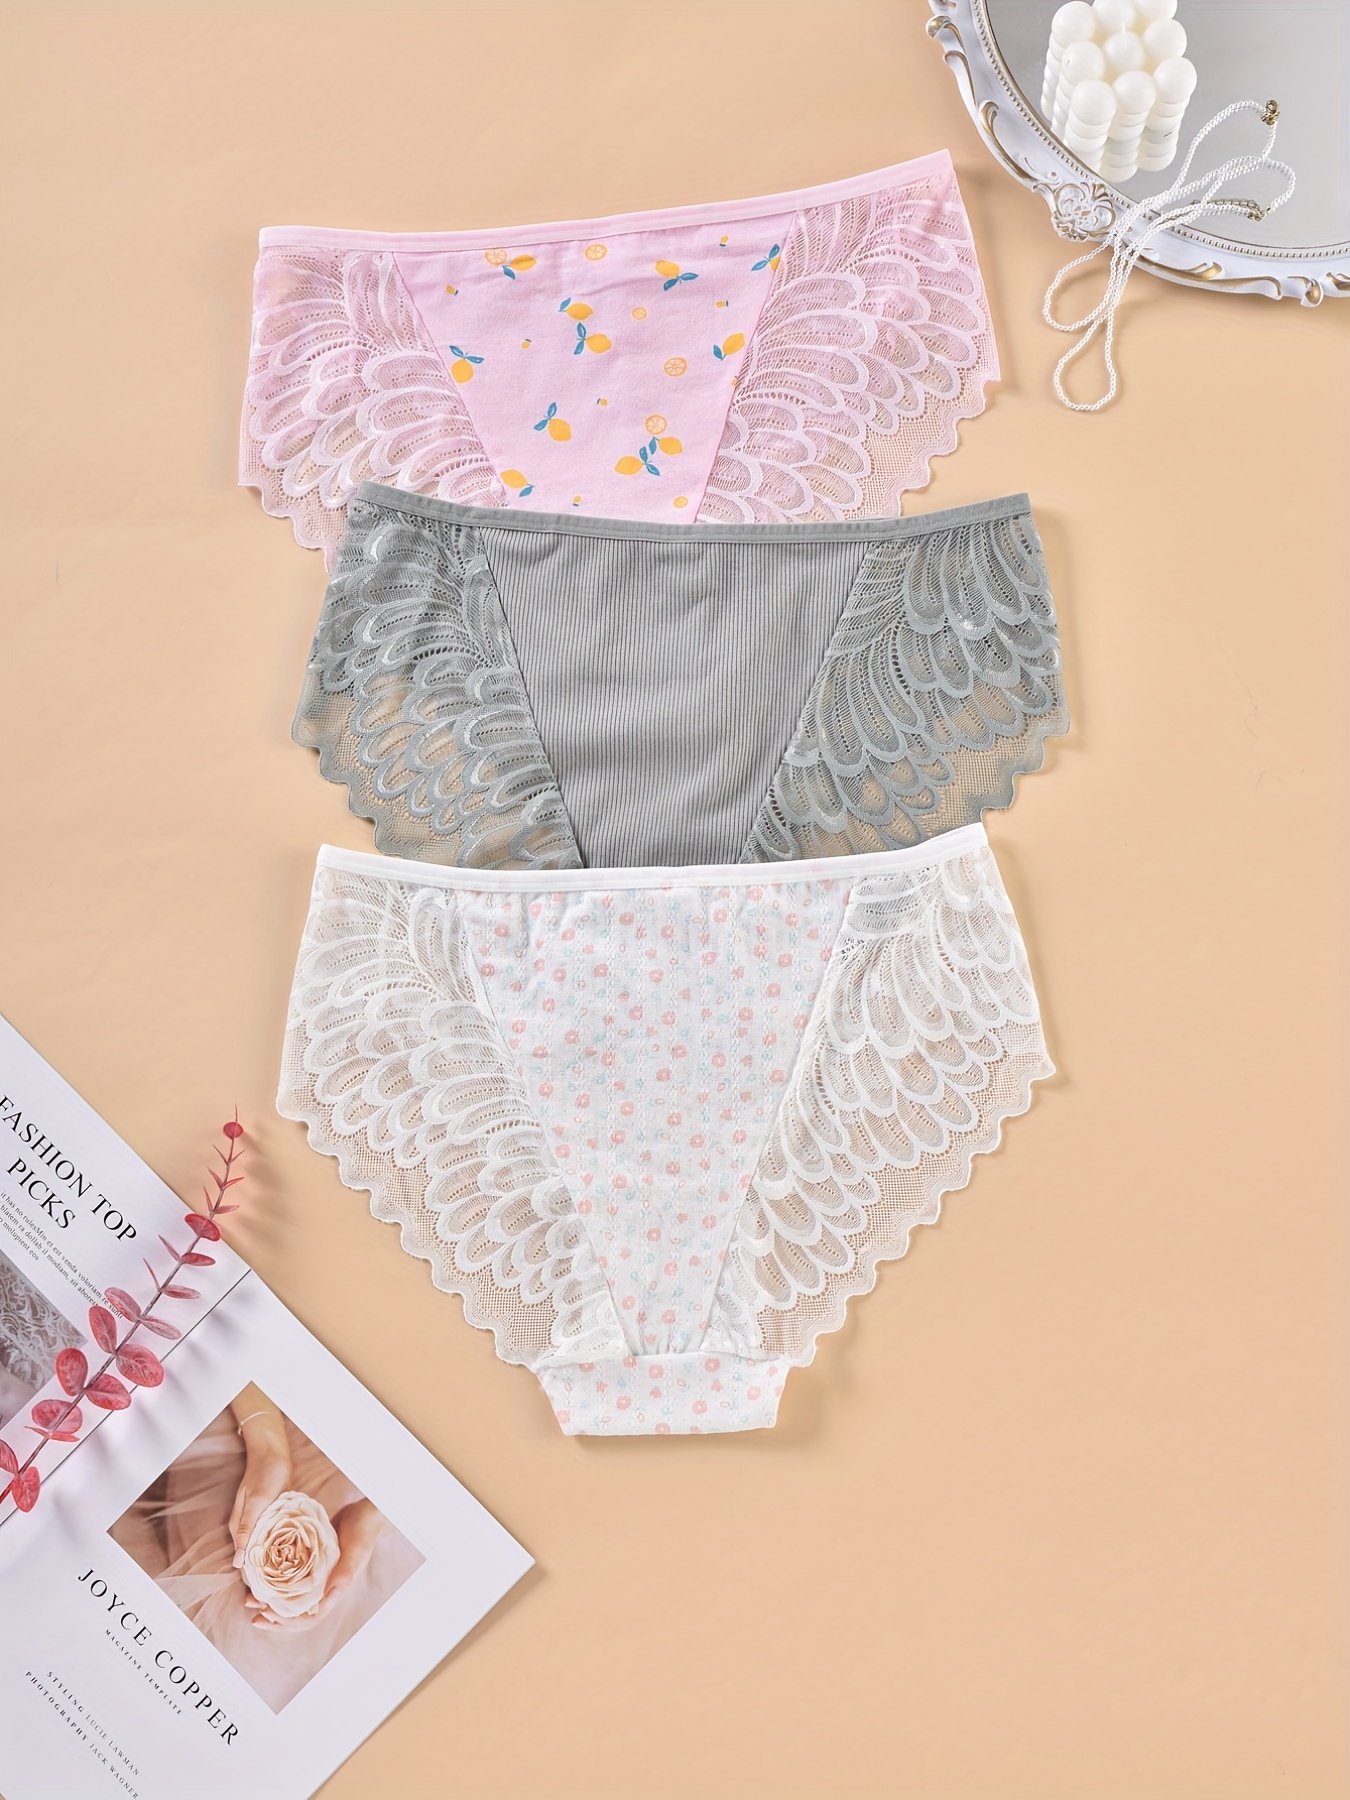 Dropship 4 Pack Plus Size Floral Print Contrast Lace Panties; Women's Plus High  Waist Breathable Elegant Panties 4pcs to Sell Online at a Lower Price